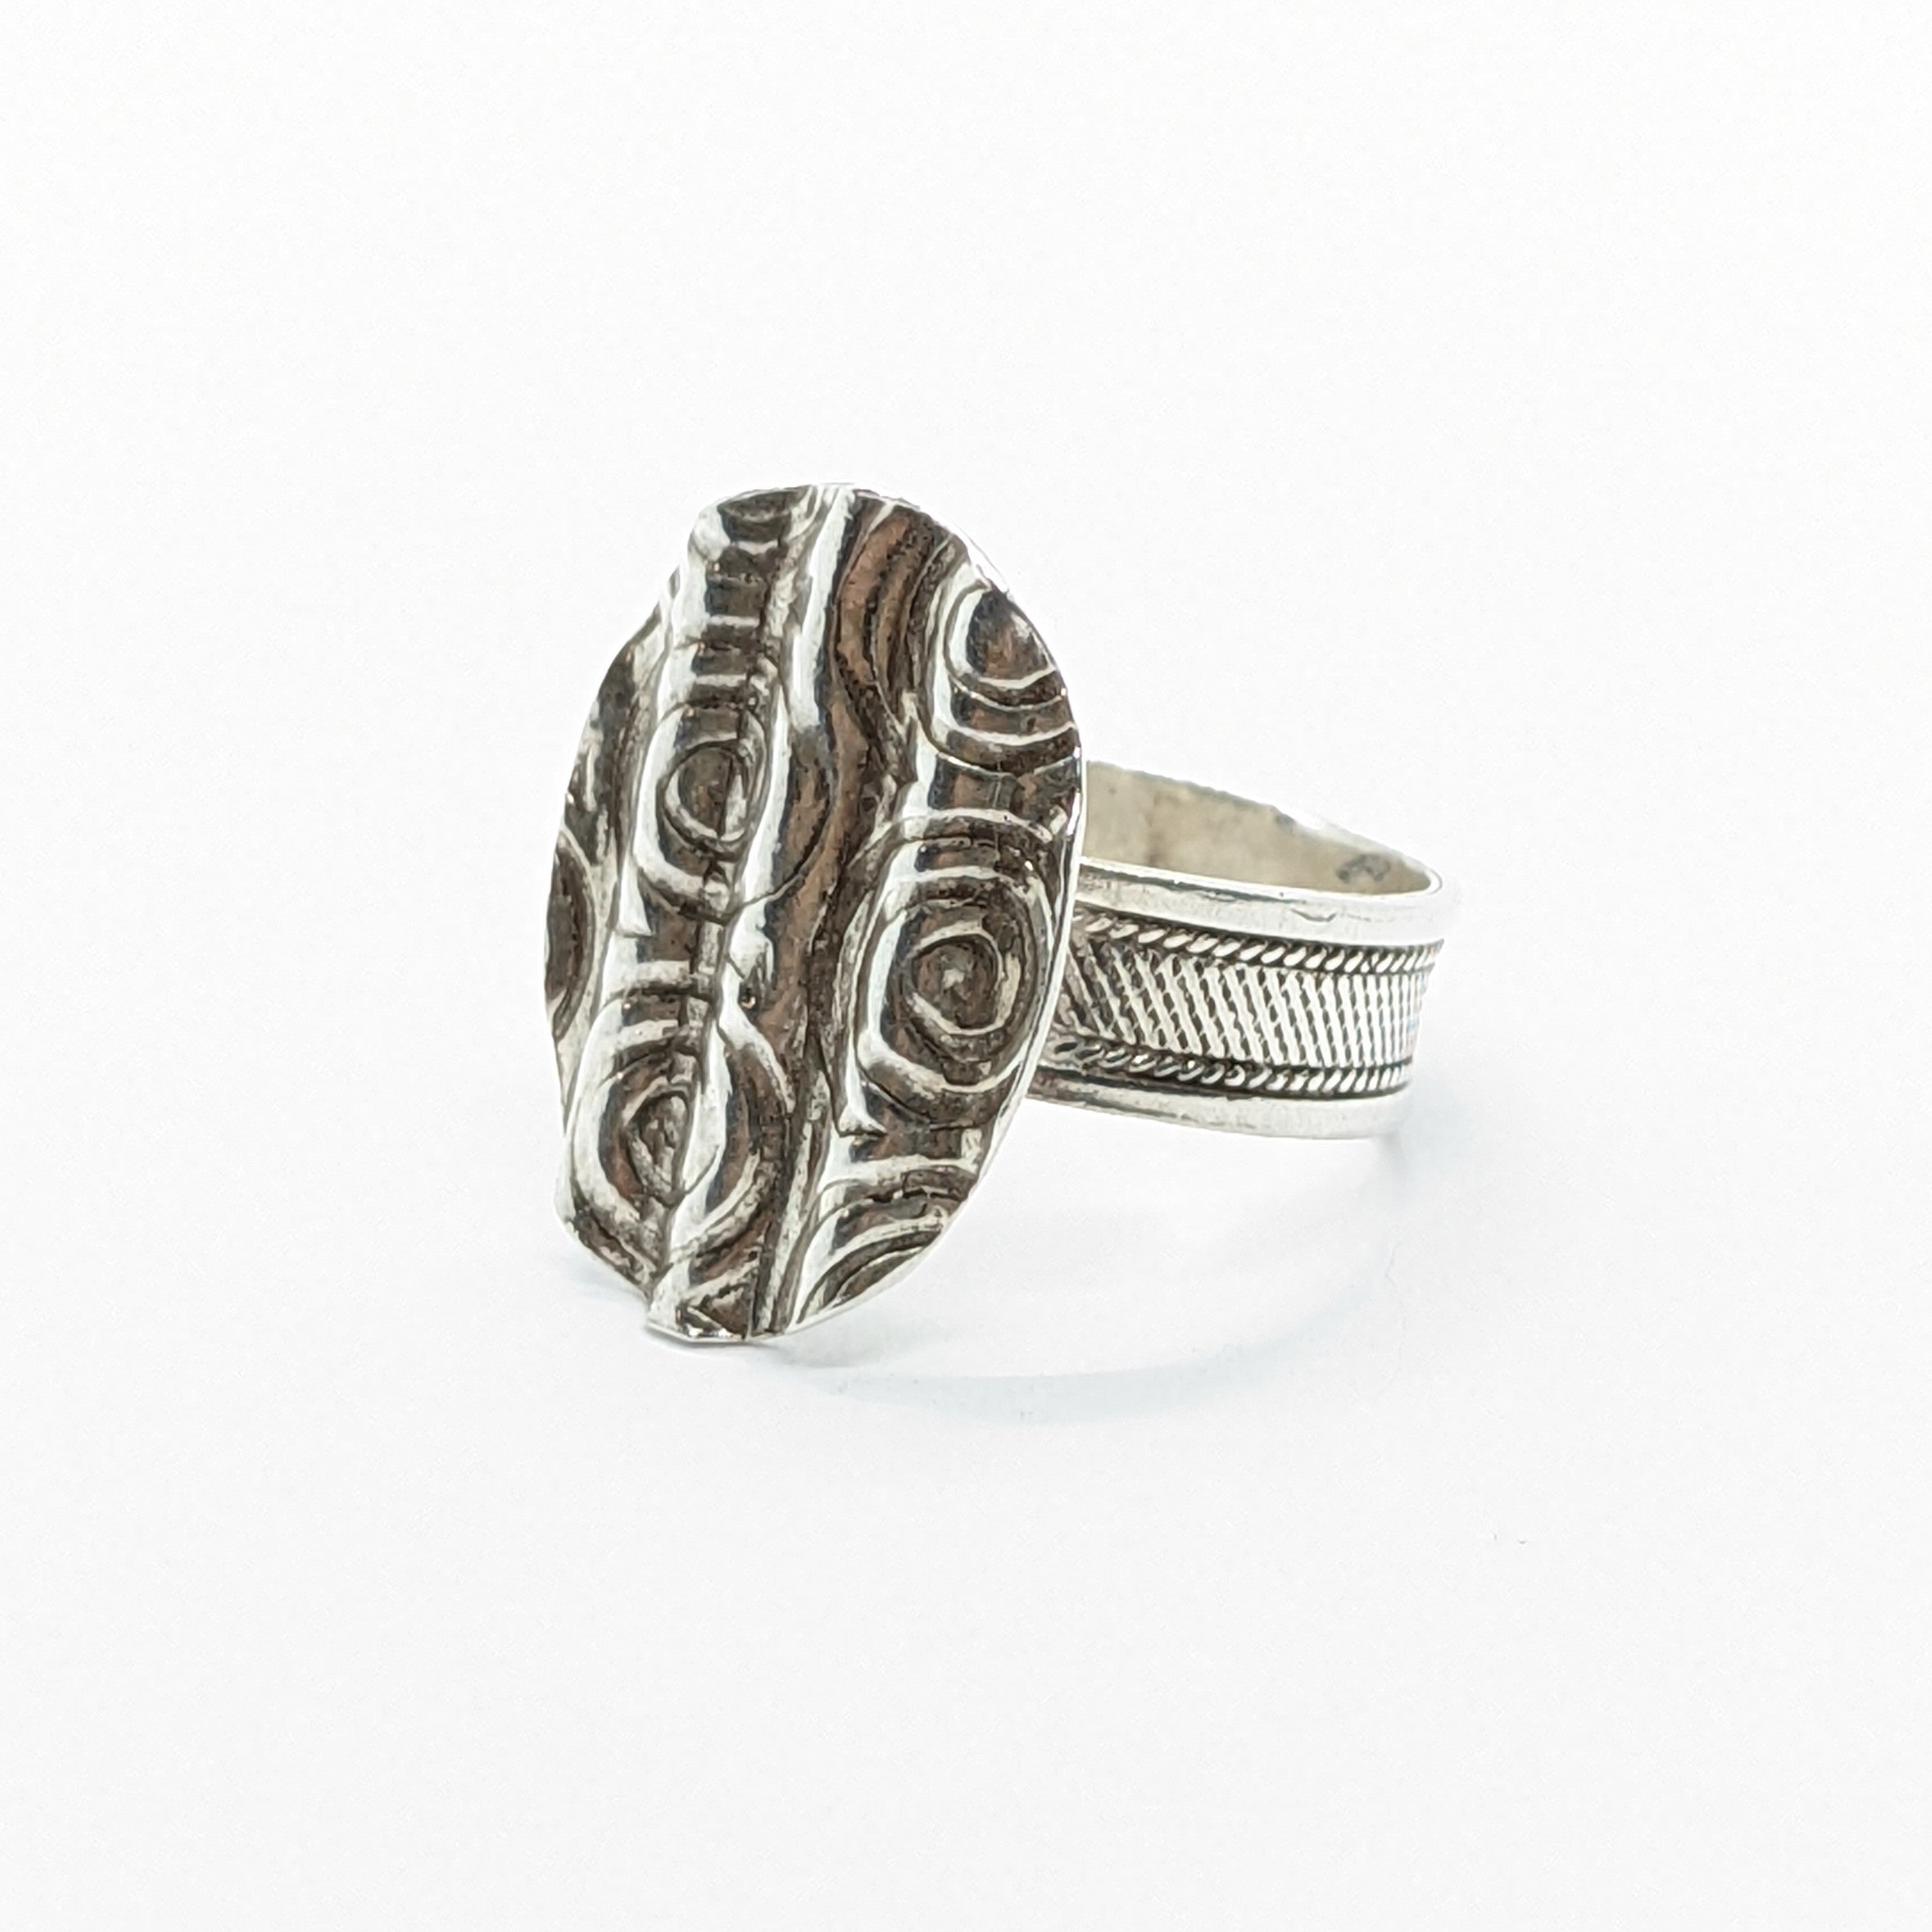 Lined Swirl Armor Ring Size 8